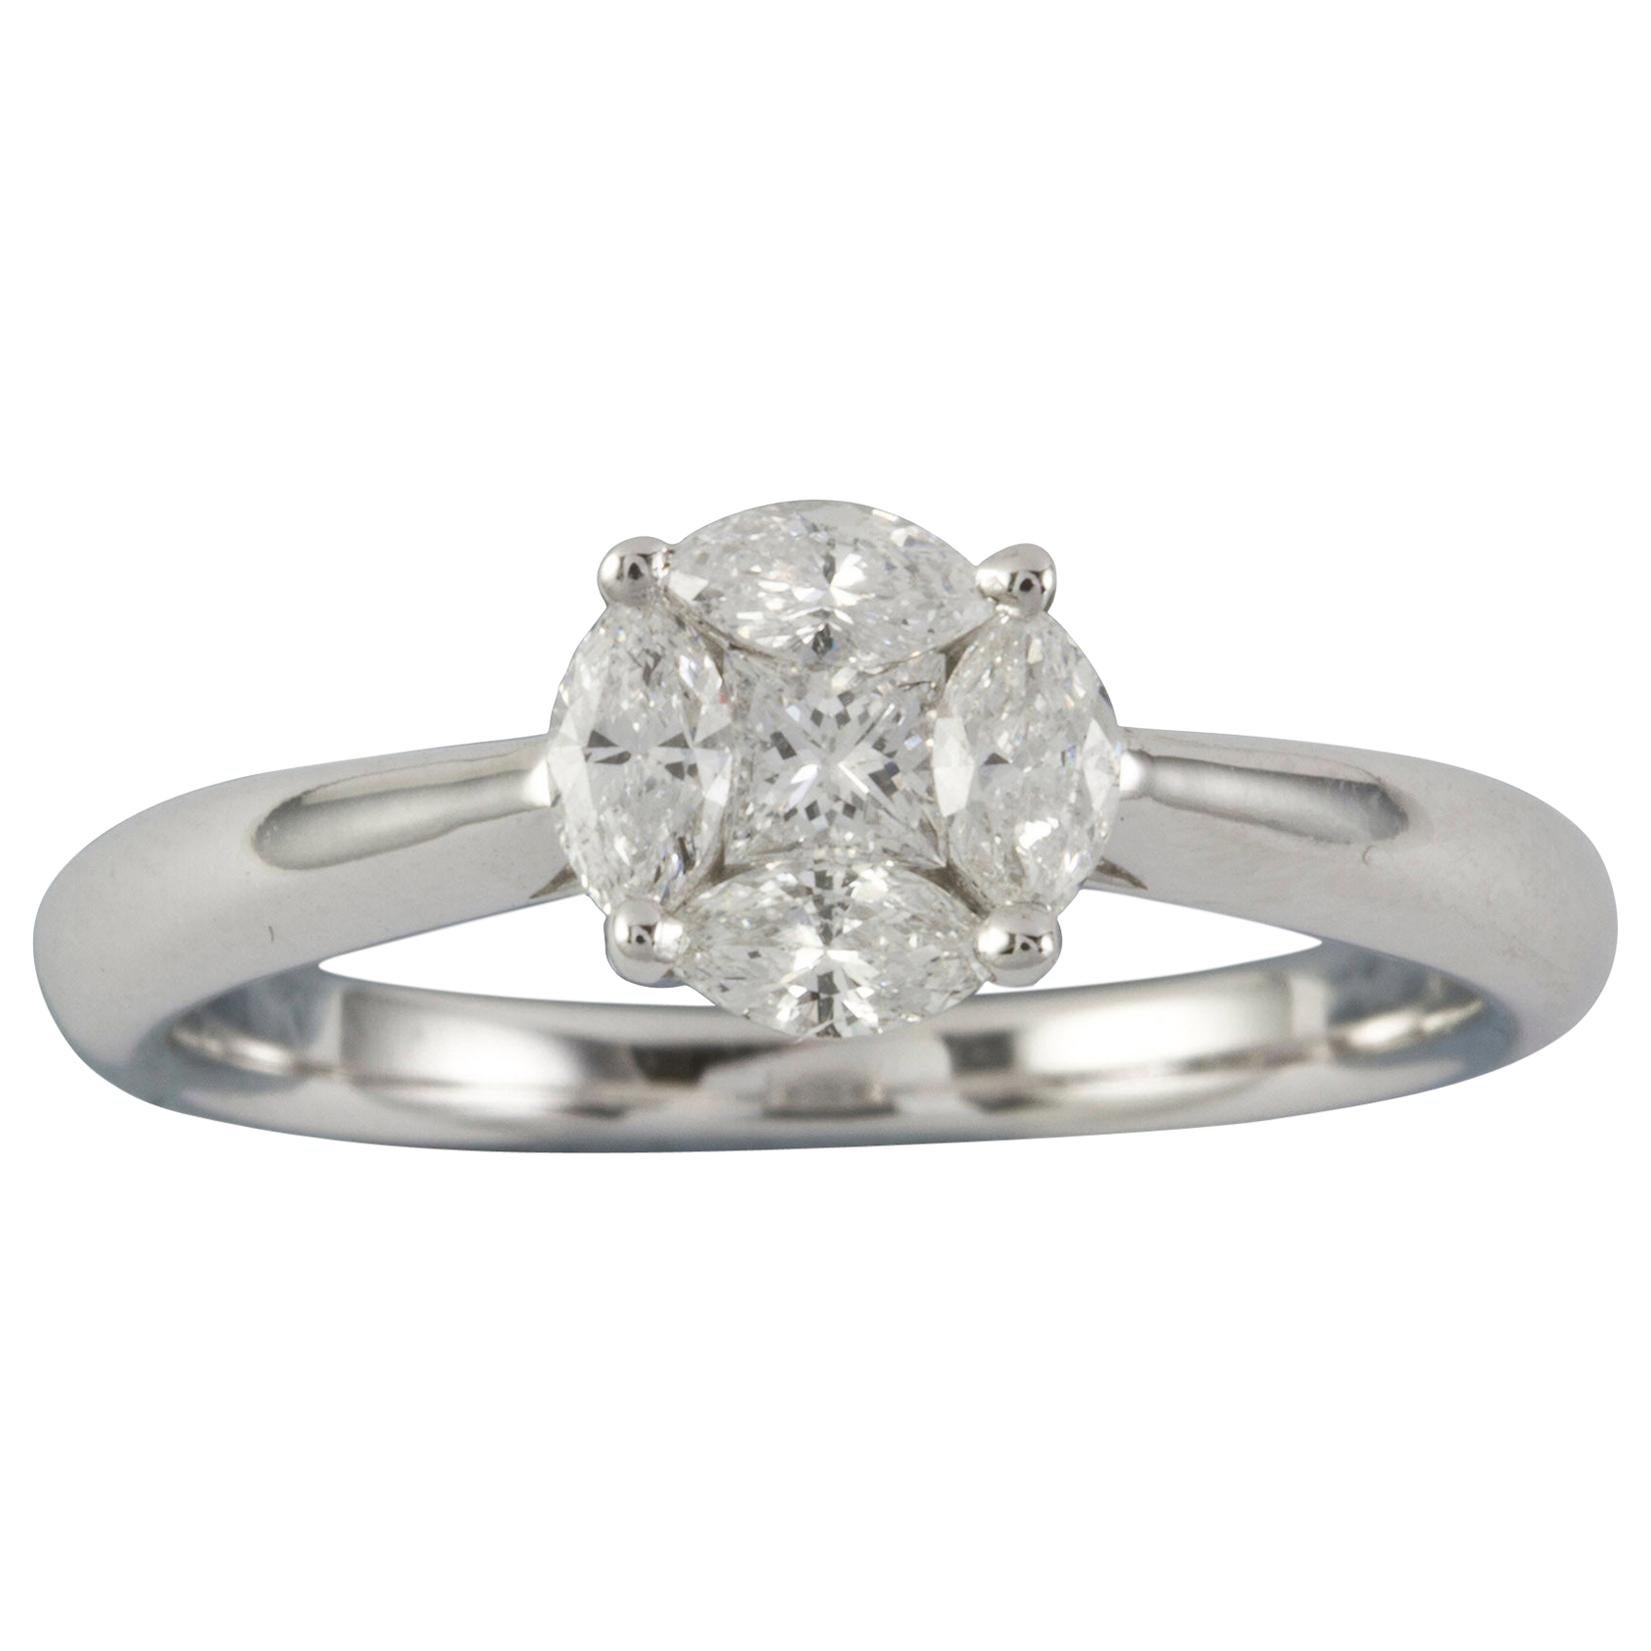 A Princess and Marquise-Cut Diamond Cluster Ring